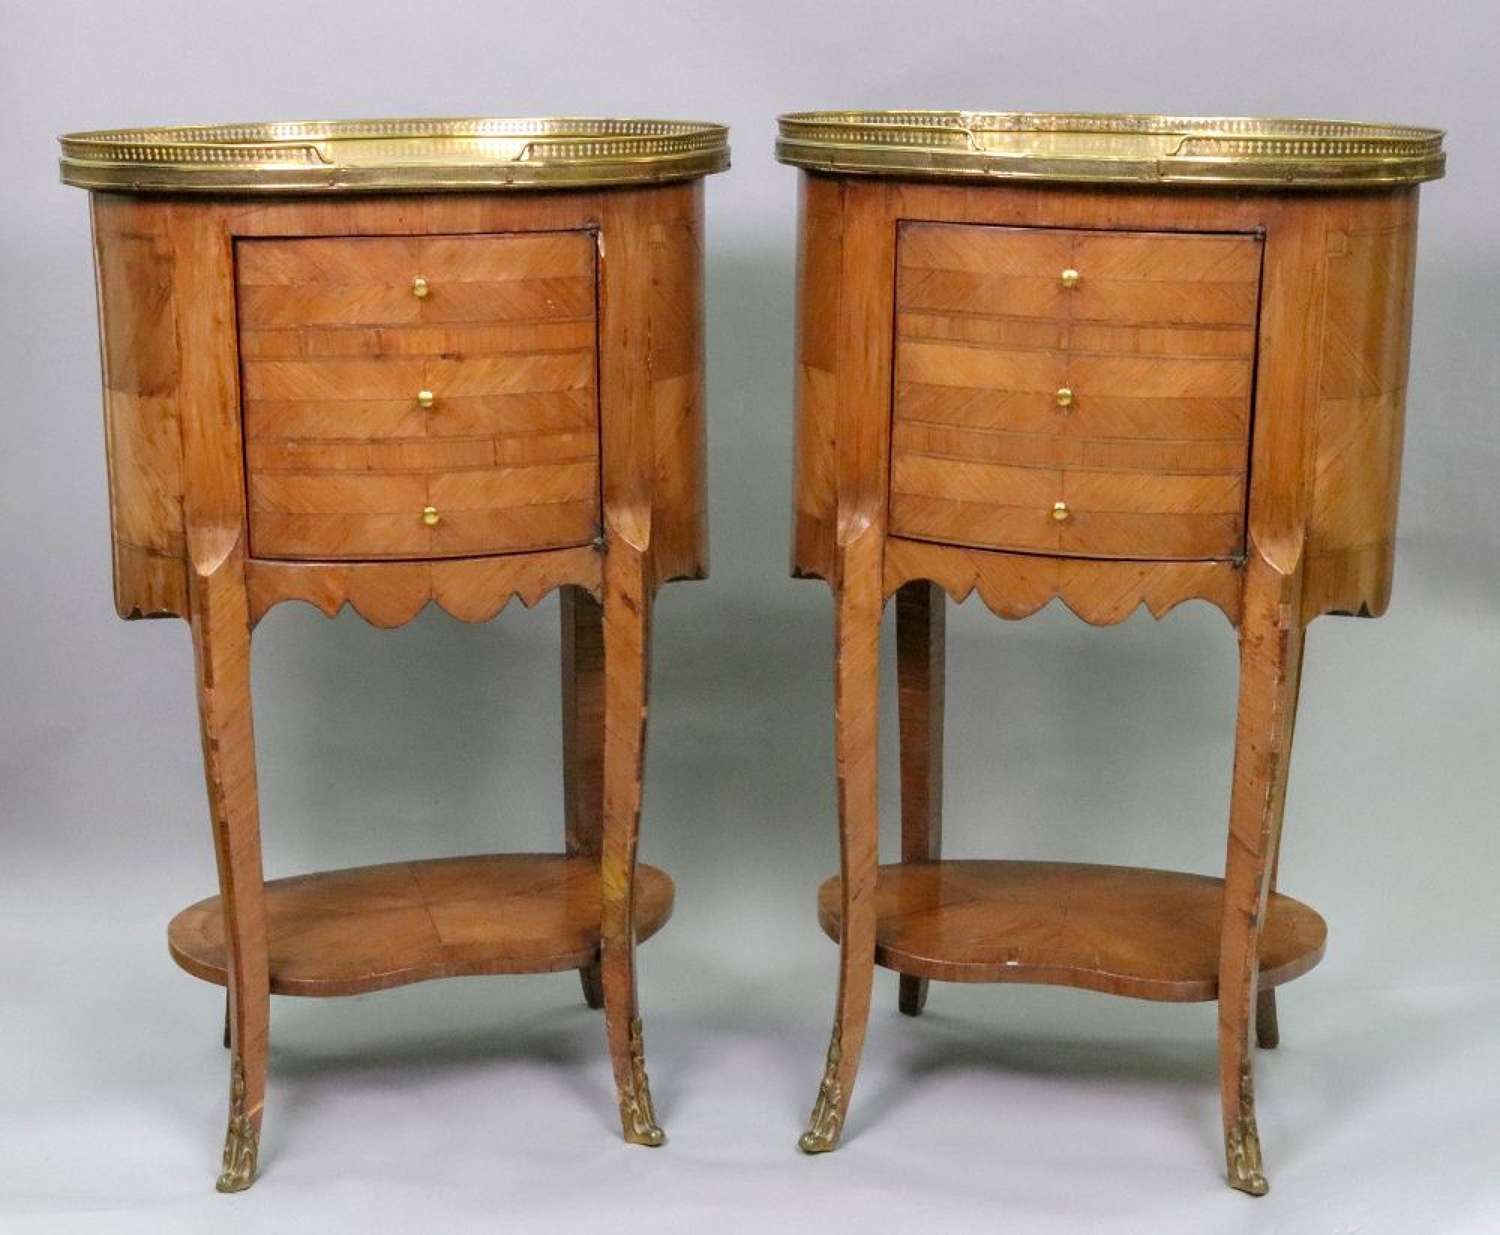 Pair of 19th Century Kingwood Bedside Tables